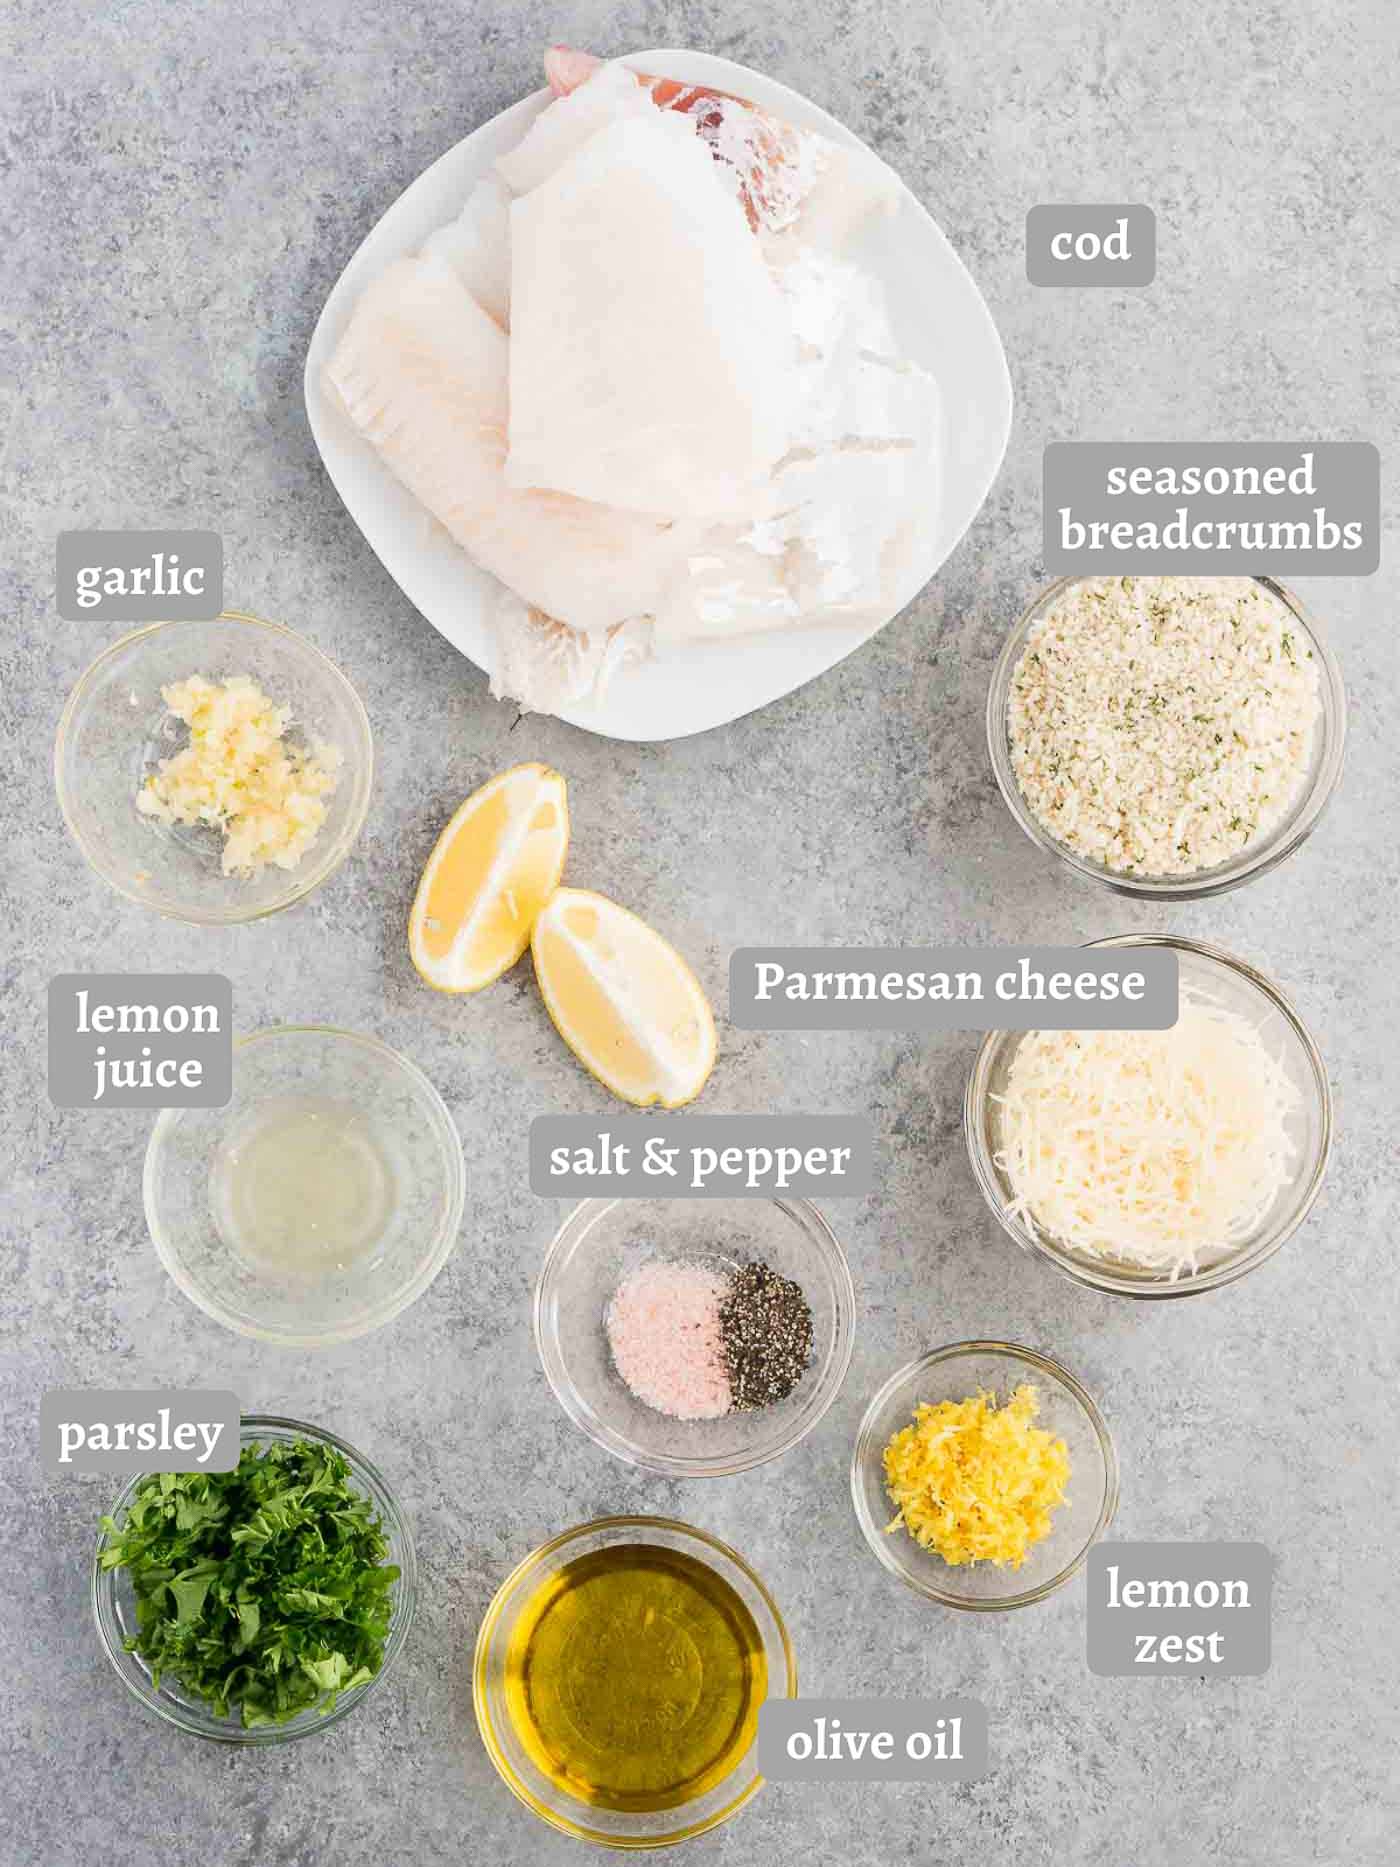 ingredients for baked cod